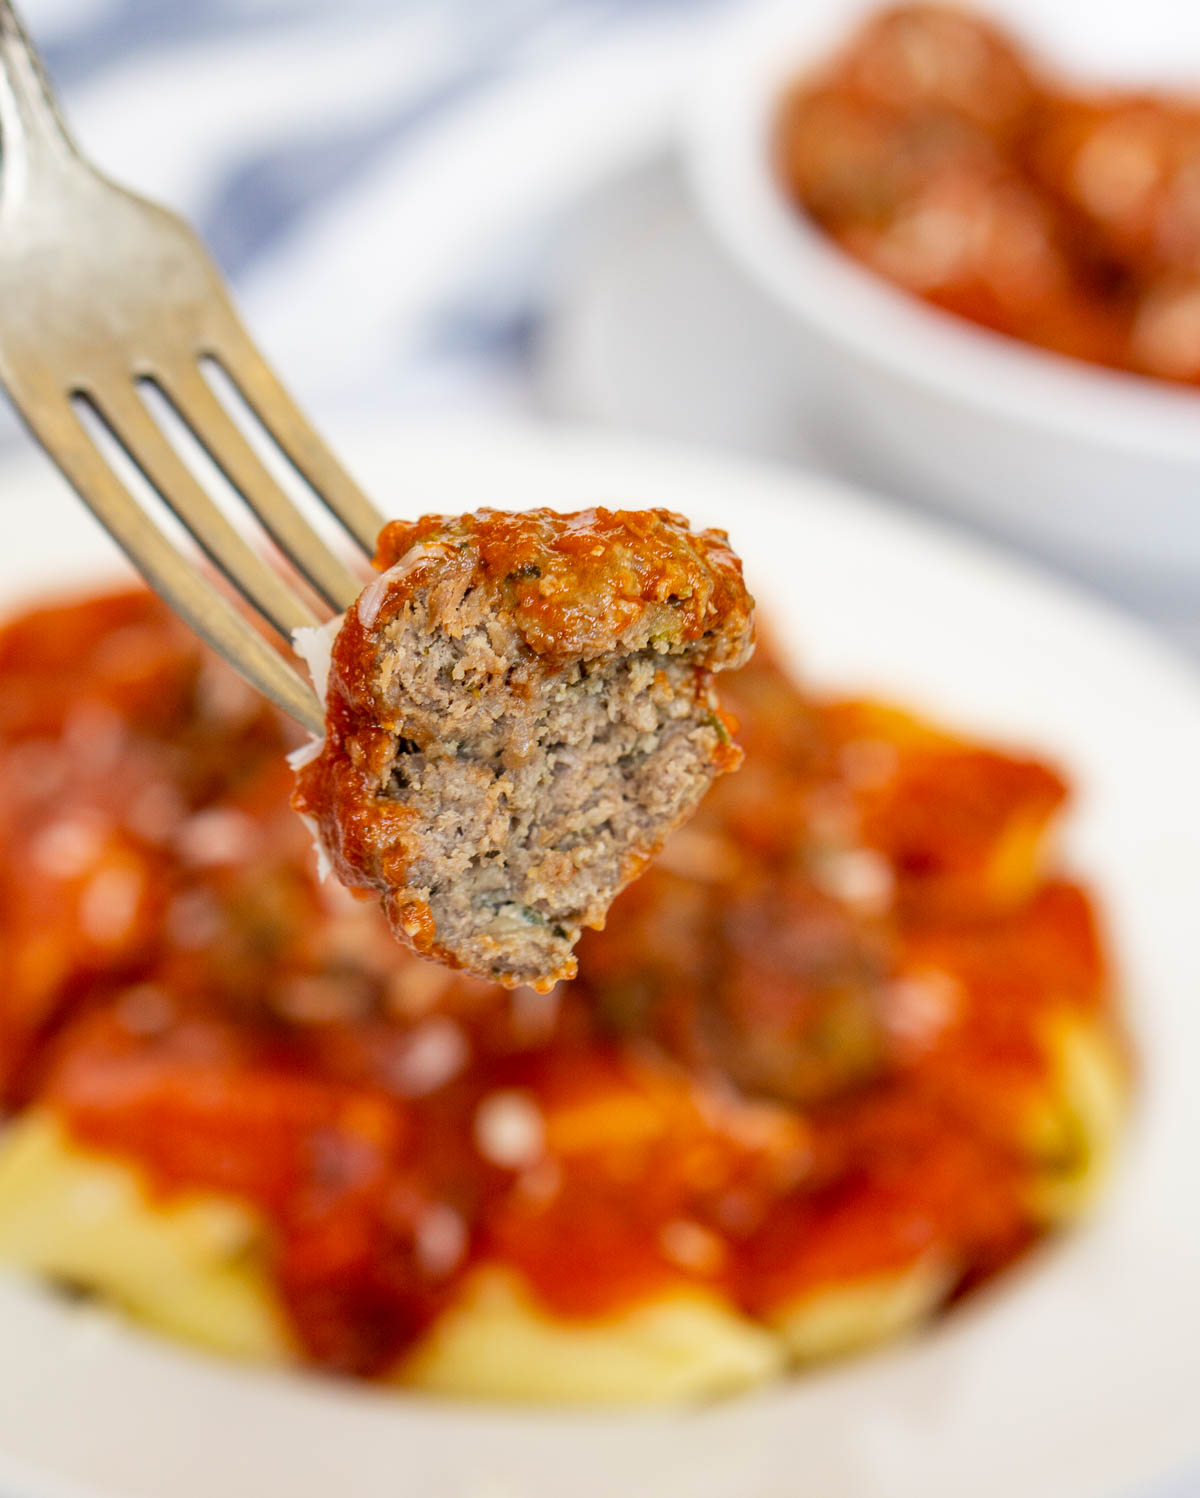 Fork holding bison meatball with a bite taken out of it to show texture inside